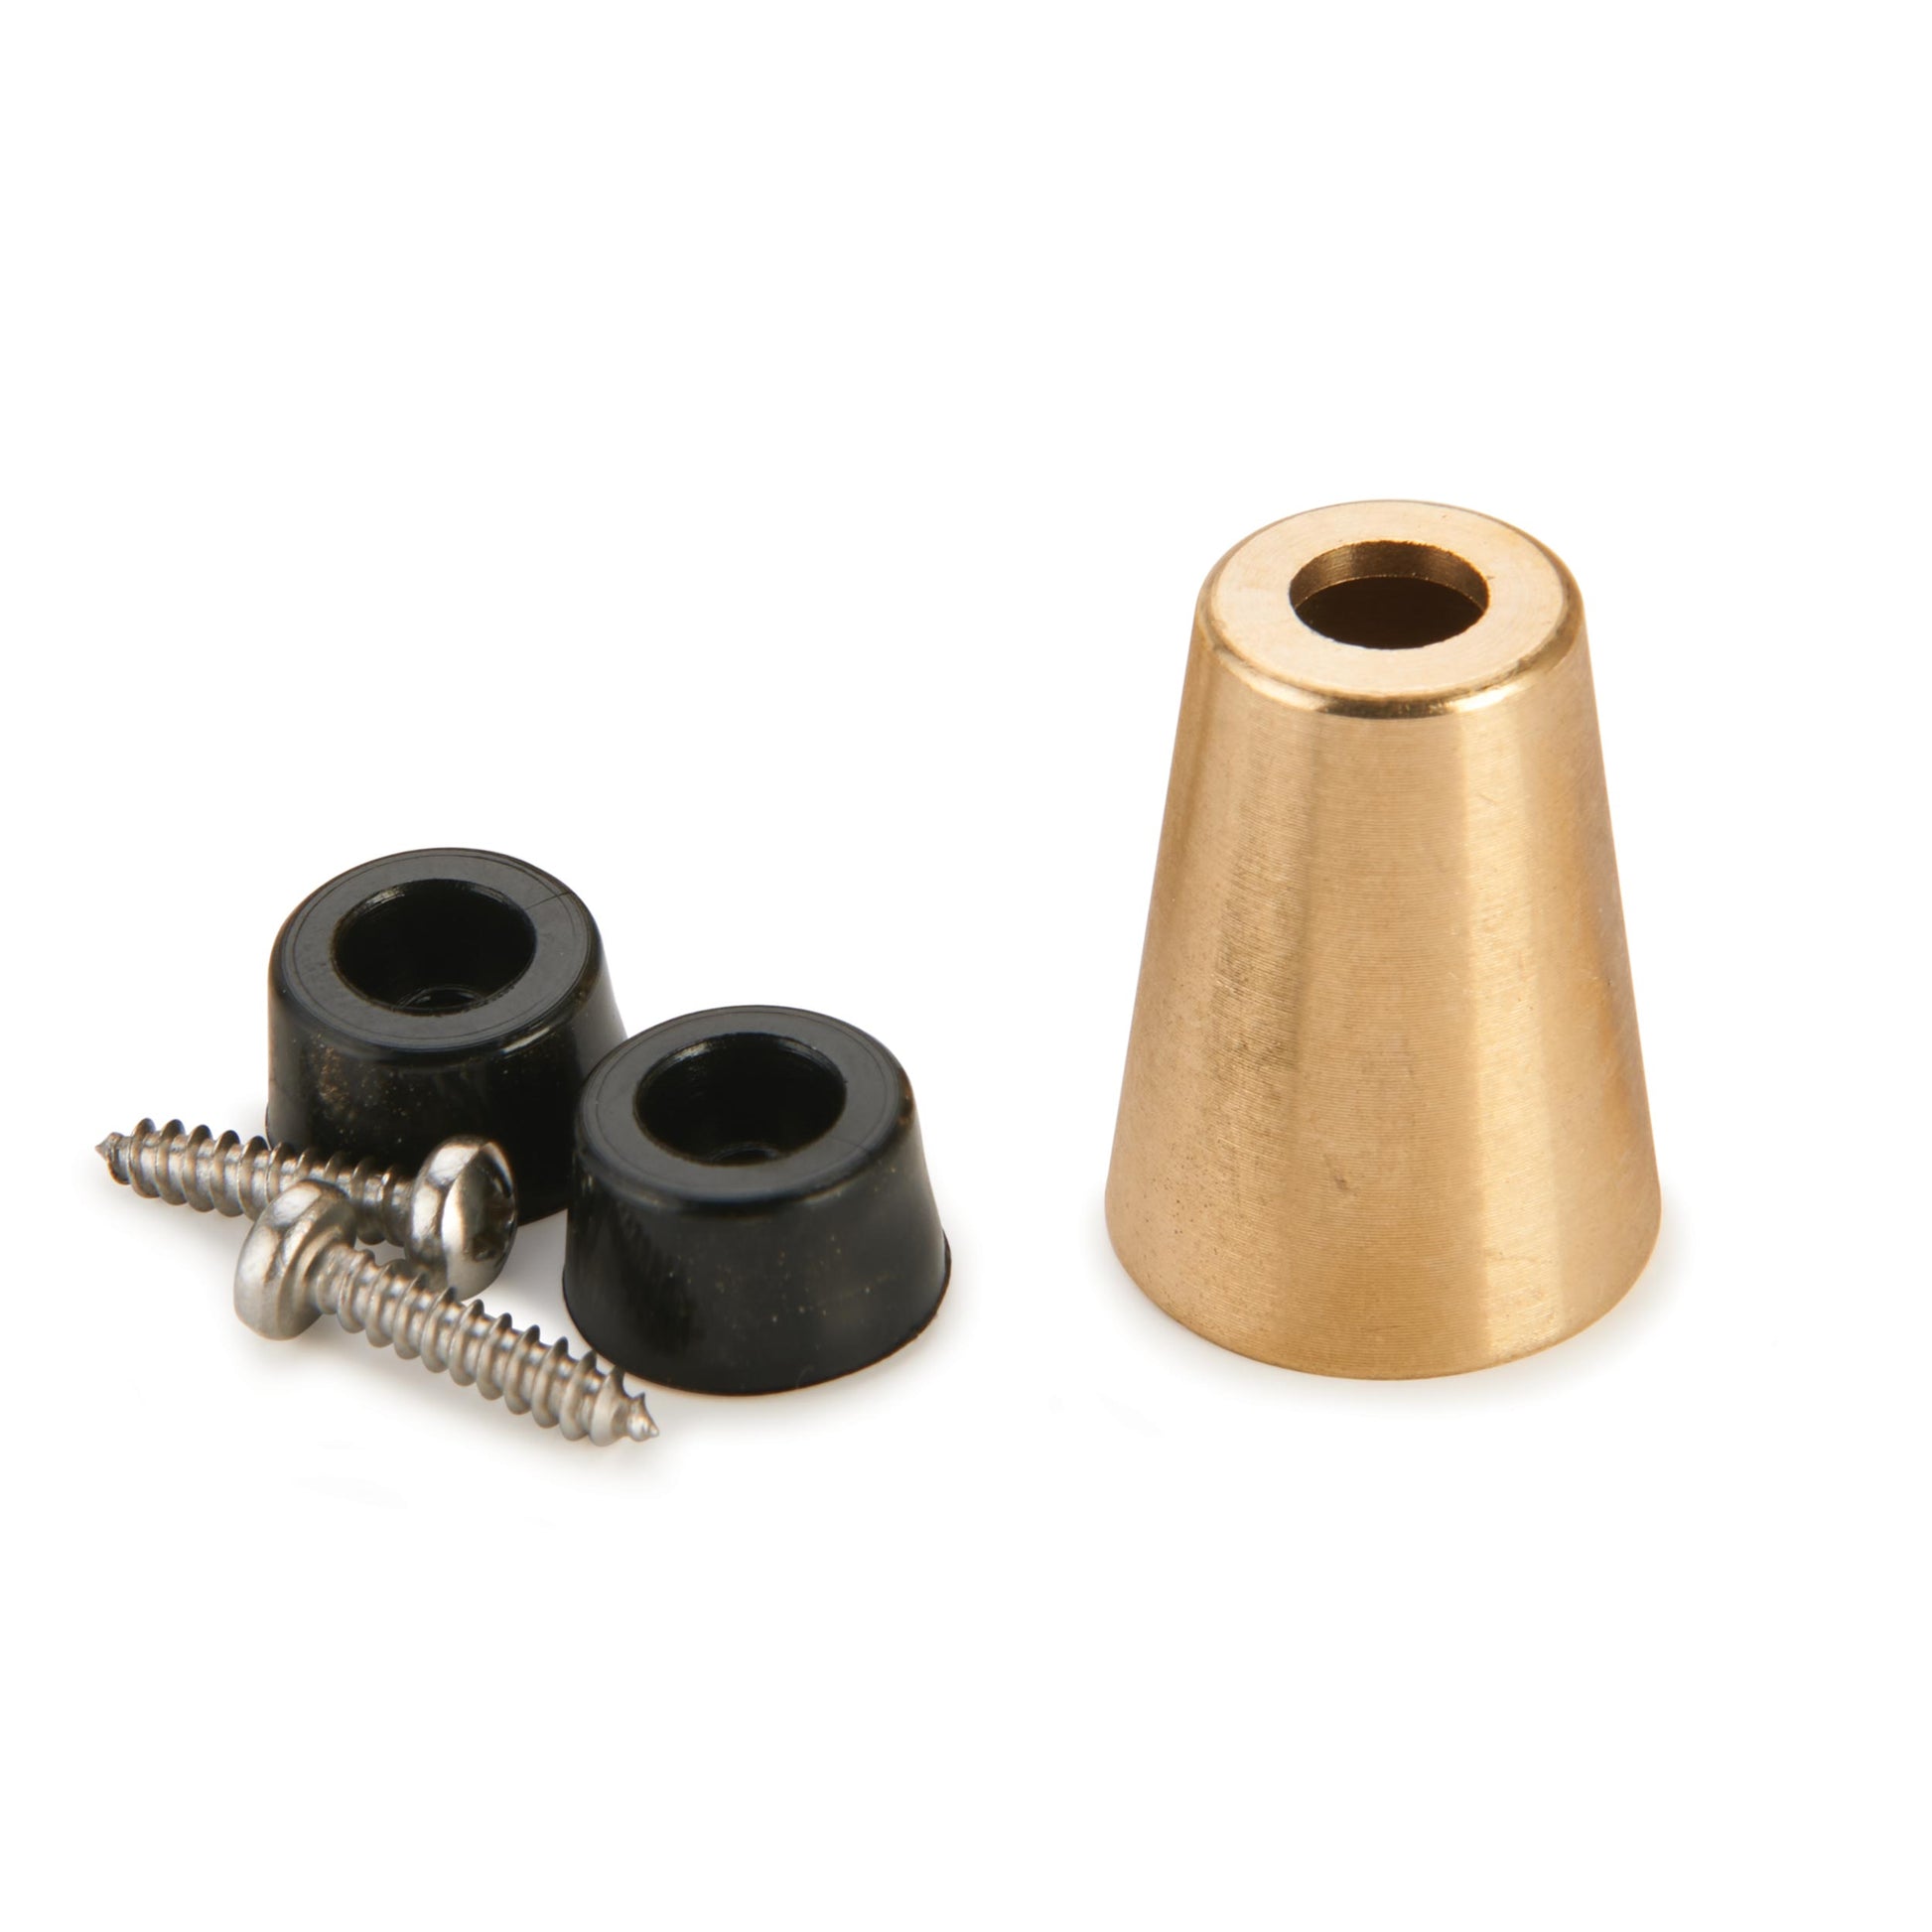 WoodRiver Cane Foot Hardware - Brass